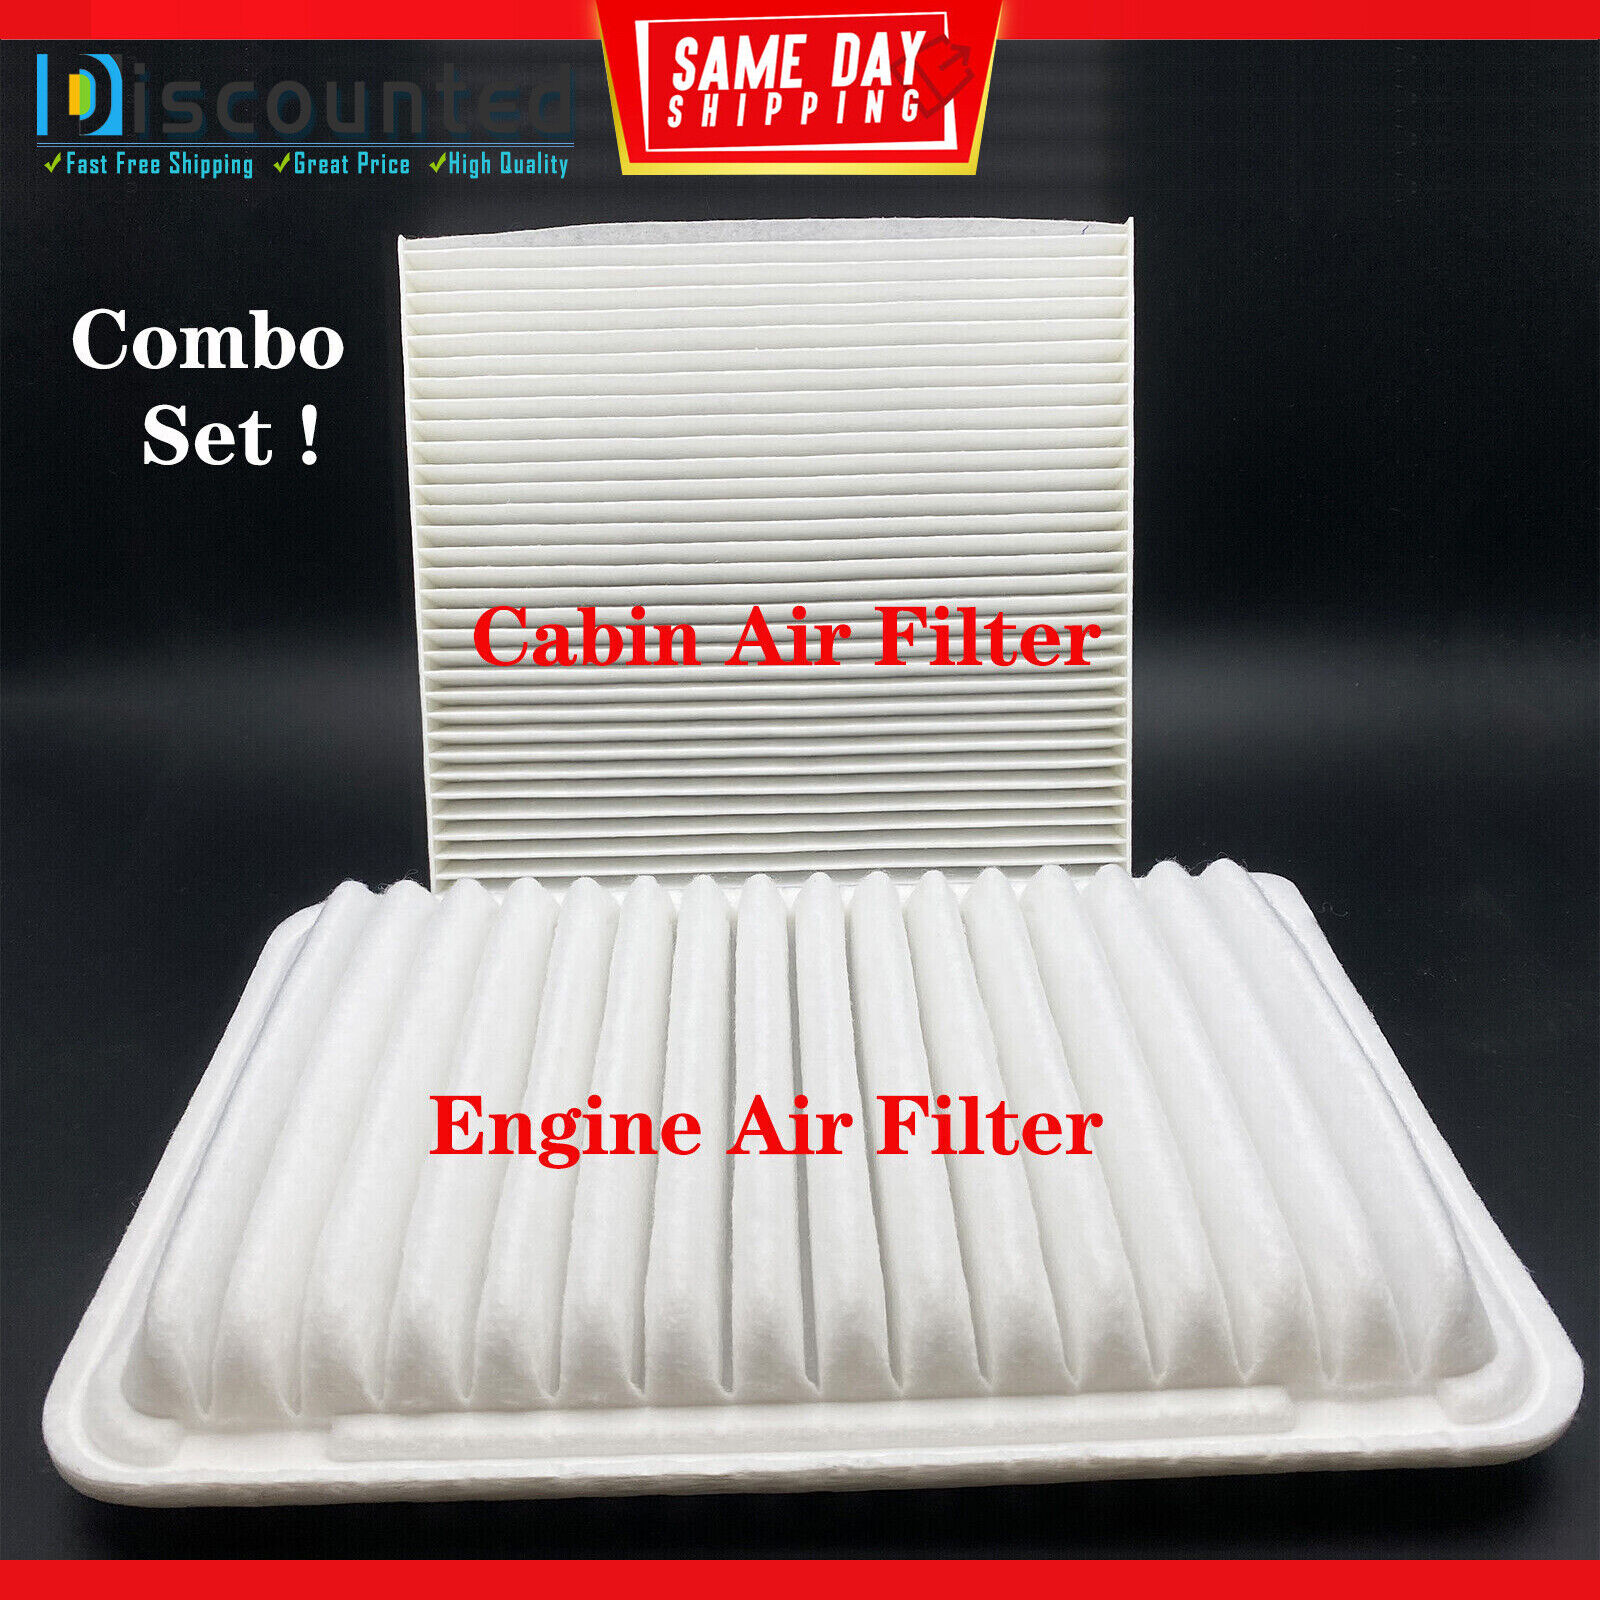 NEW Cabin & Engine Air Filter Combo Set For 2009-2018 Toyota Corolla 1.8L 2.4L